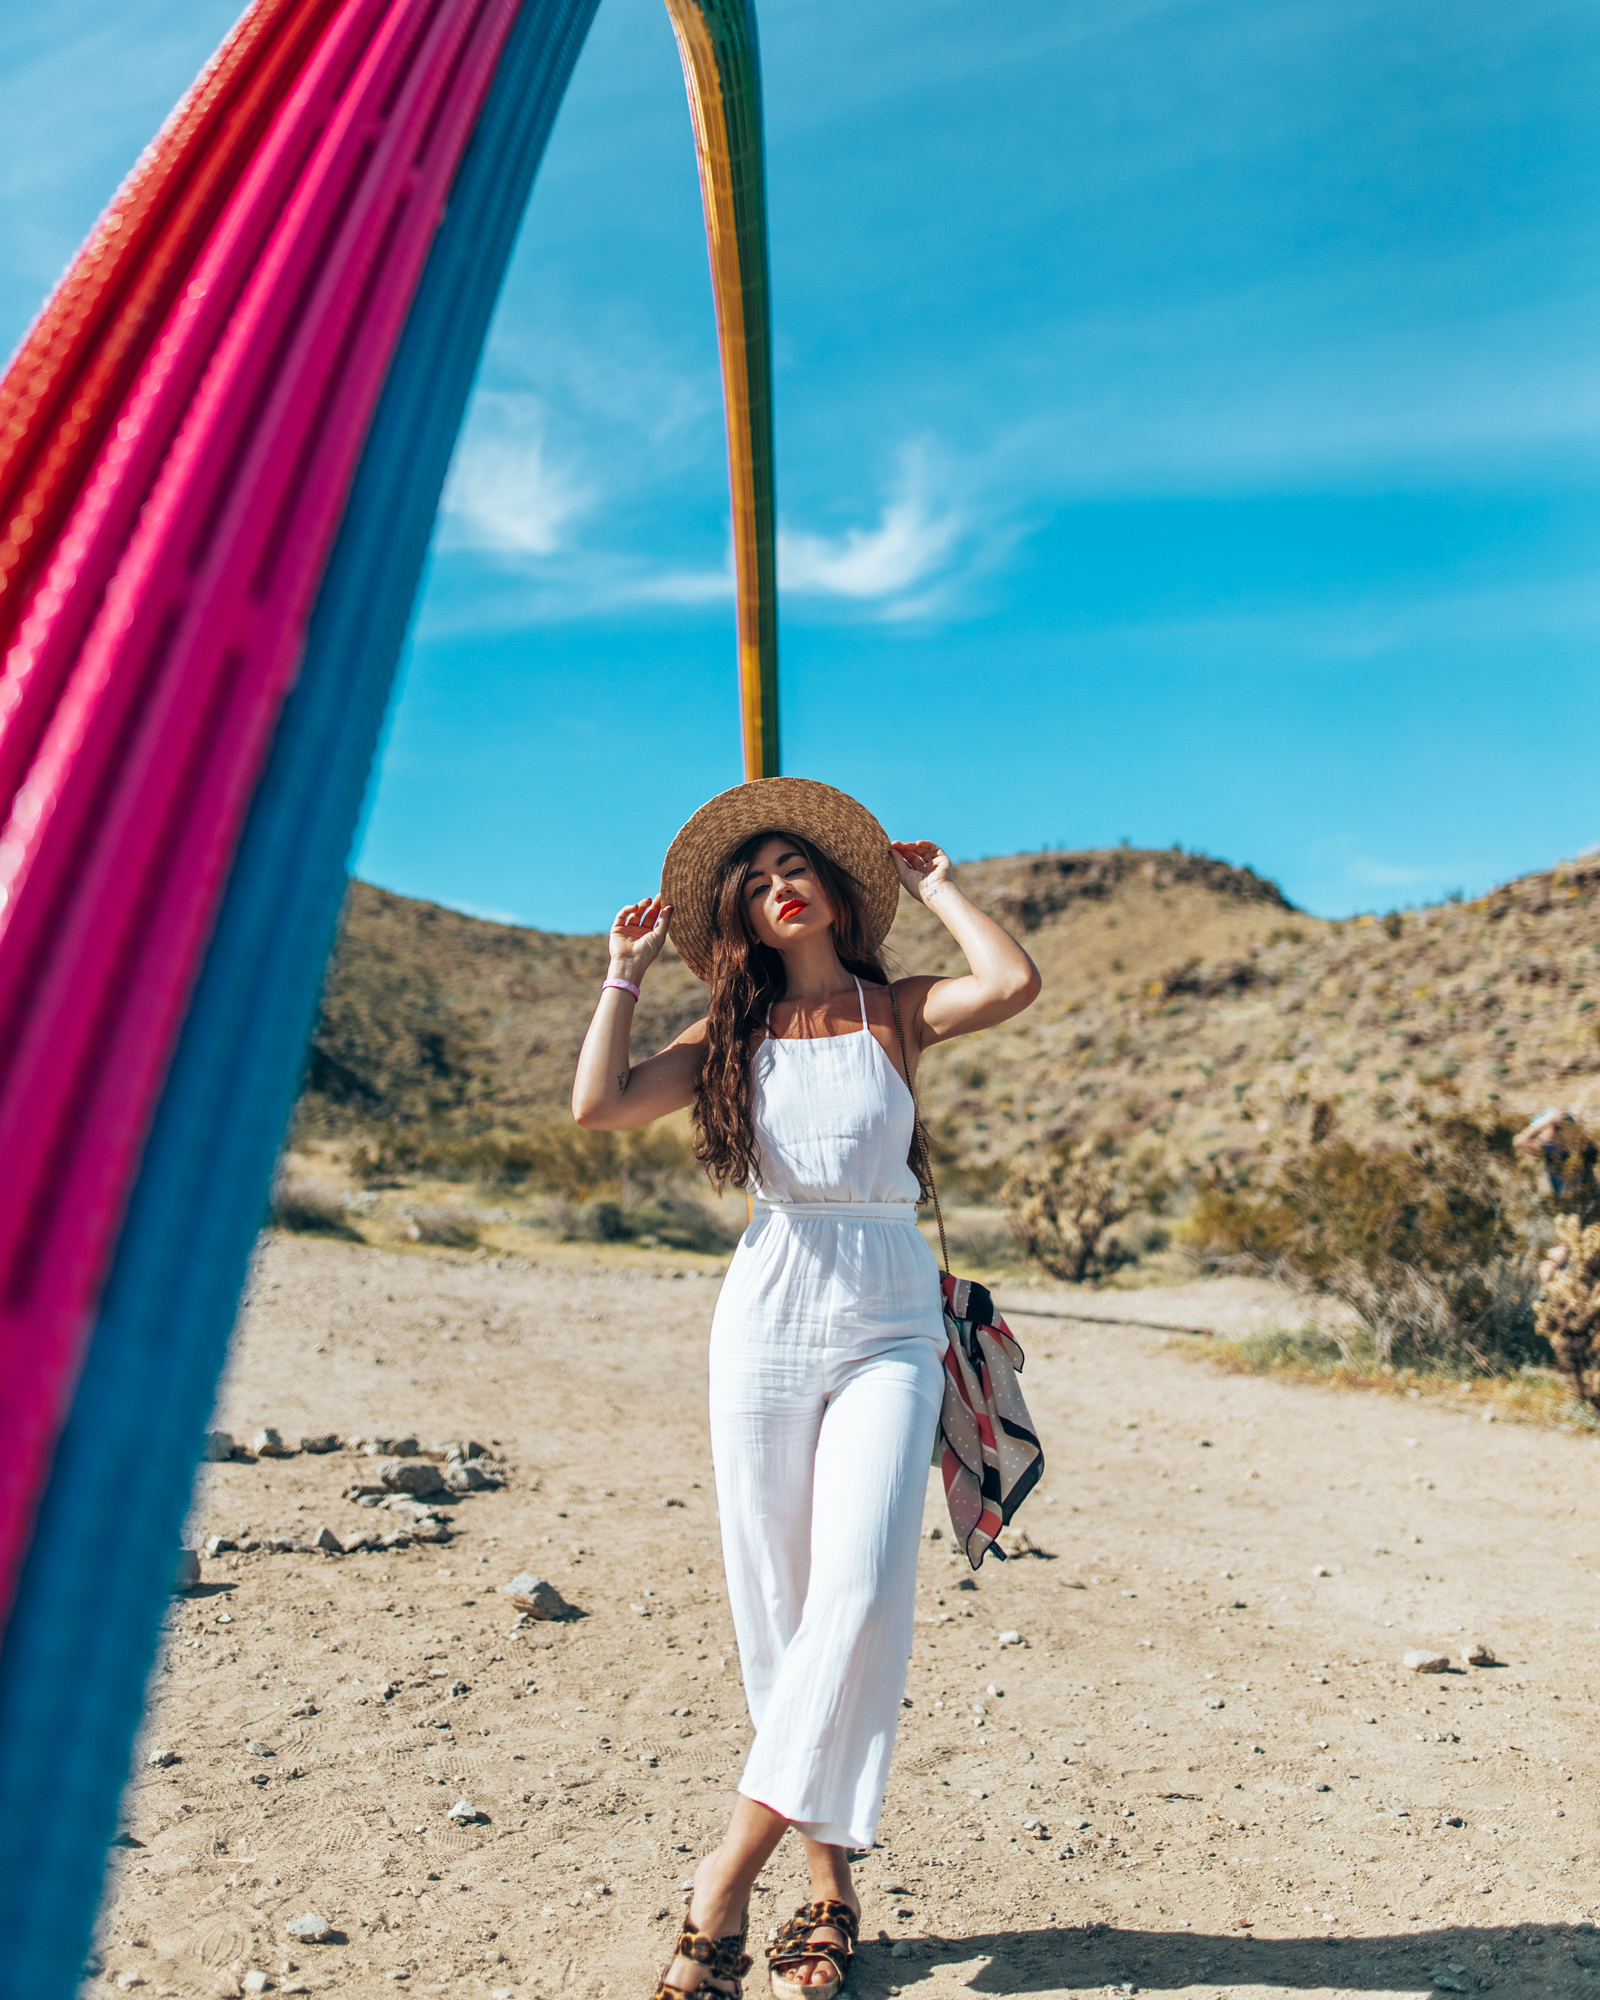 Photo Guide to Desert X 2019 - The Top 5 Instagrammable Art ...